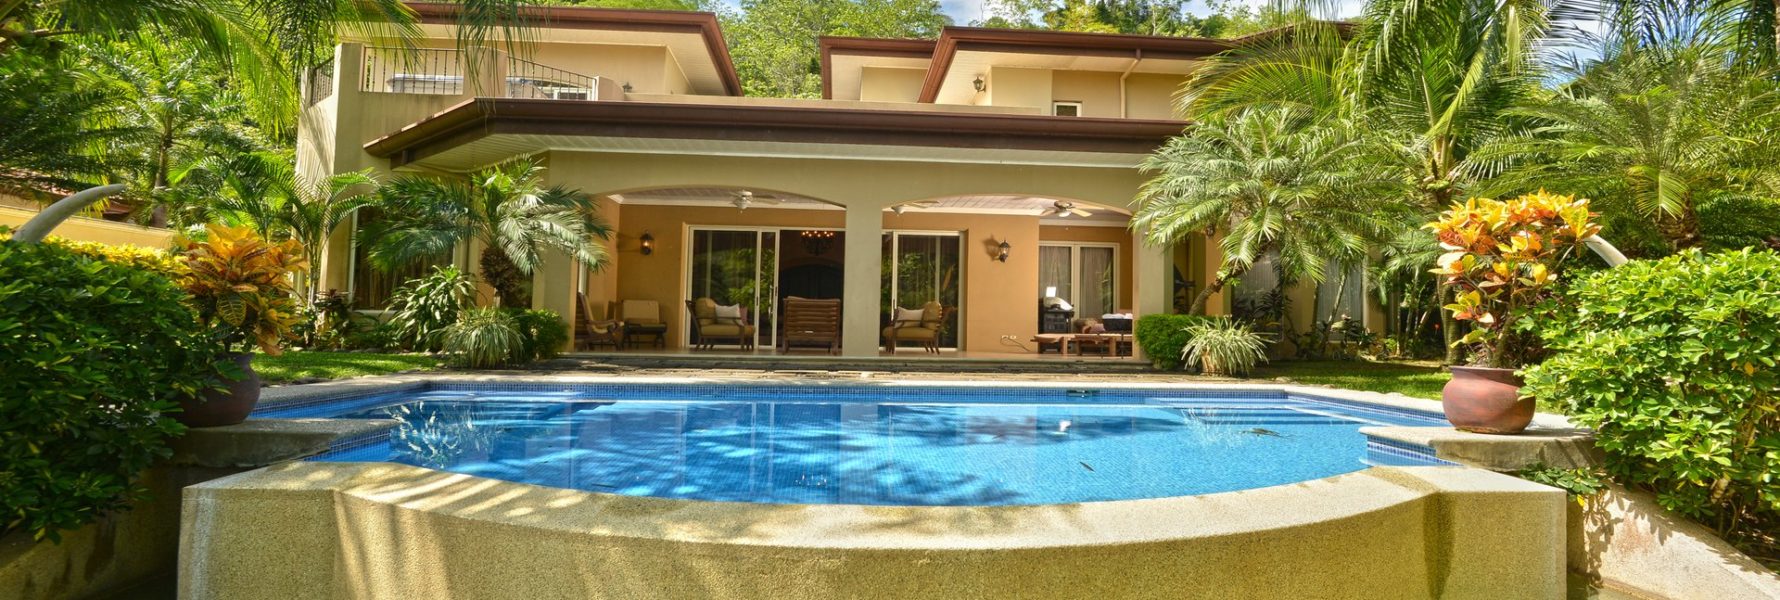 Large luxury villa JA-04, located in the pristine area near Jaco is close to restaurants, marina and an 18 hole golf course. 